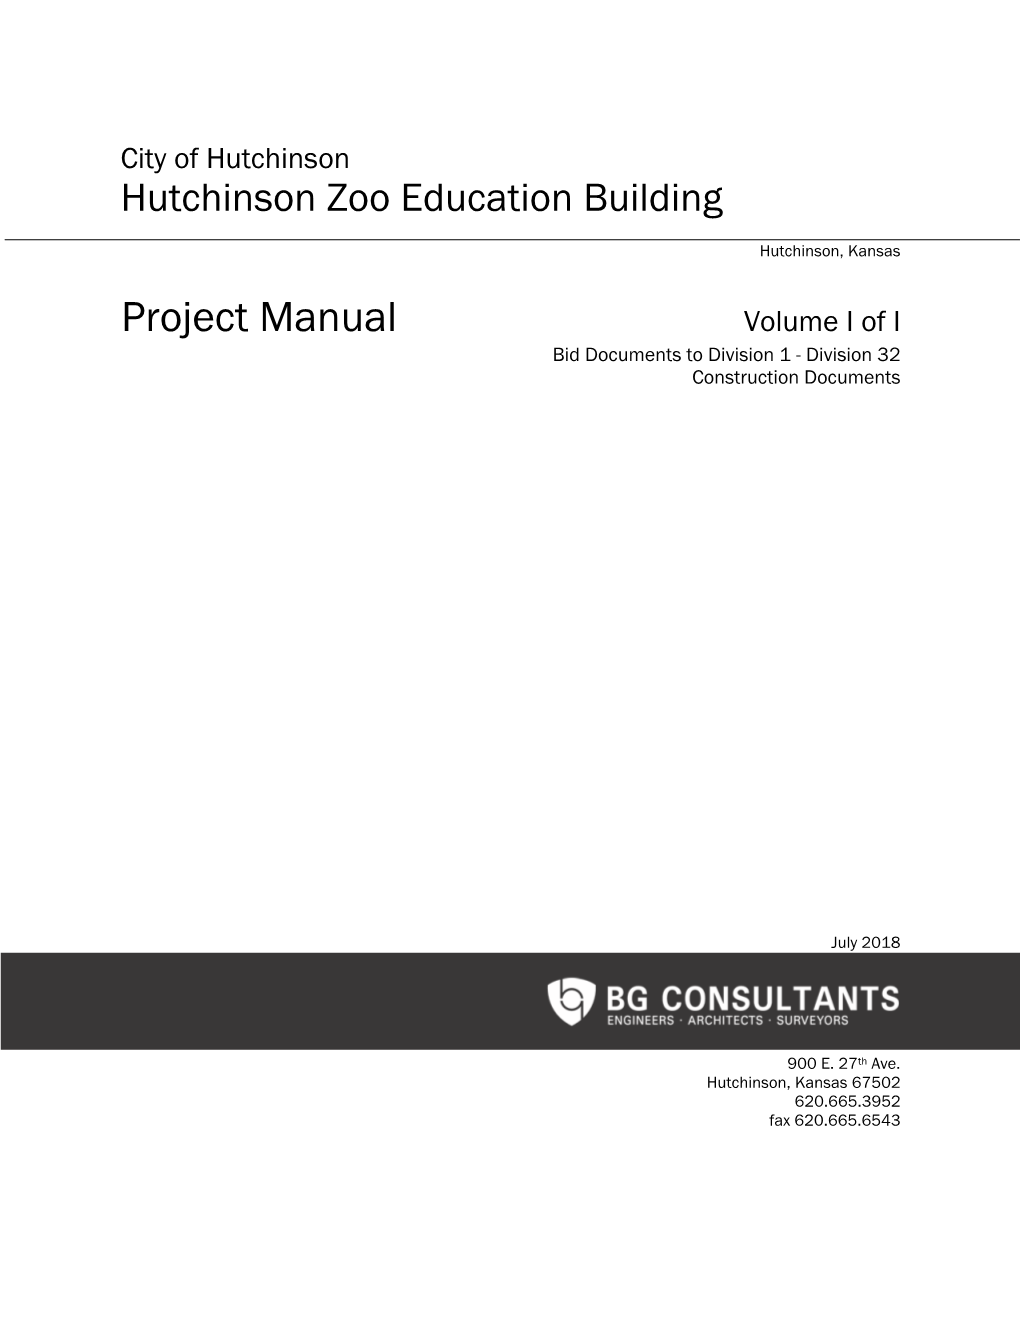 Project Manual Volume I of I Bid Documents to Division 1 - Division 32 Construction Documents